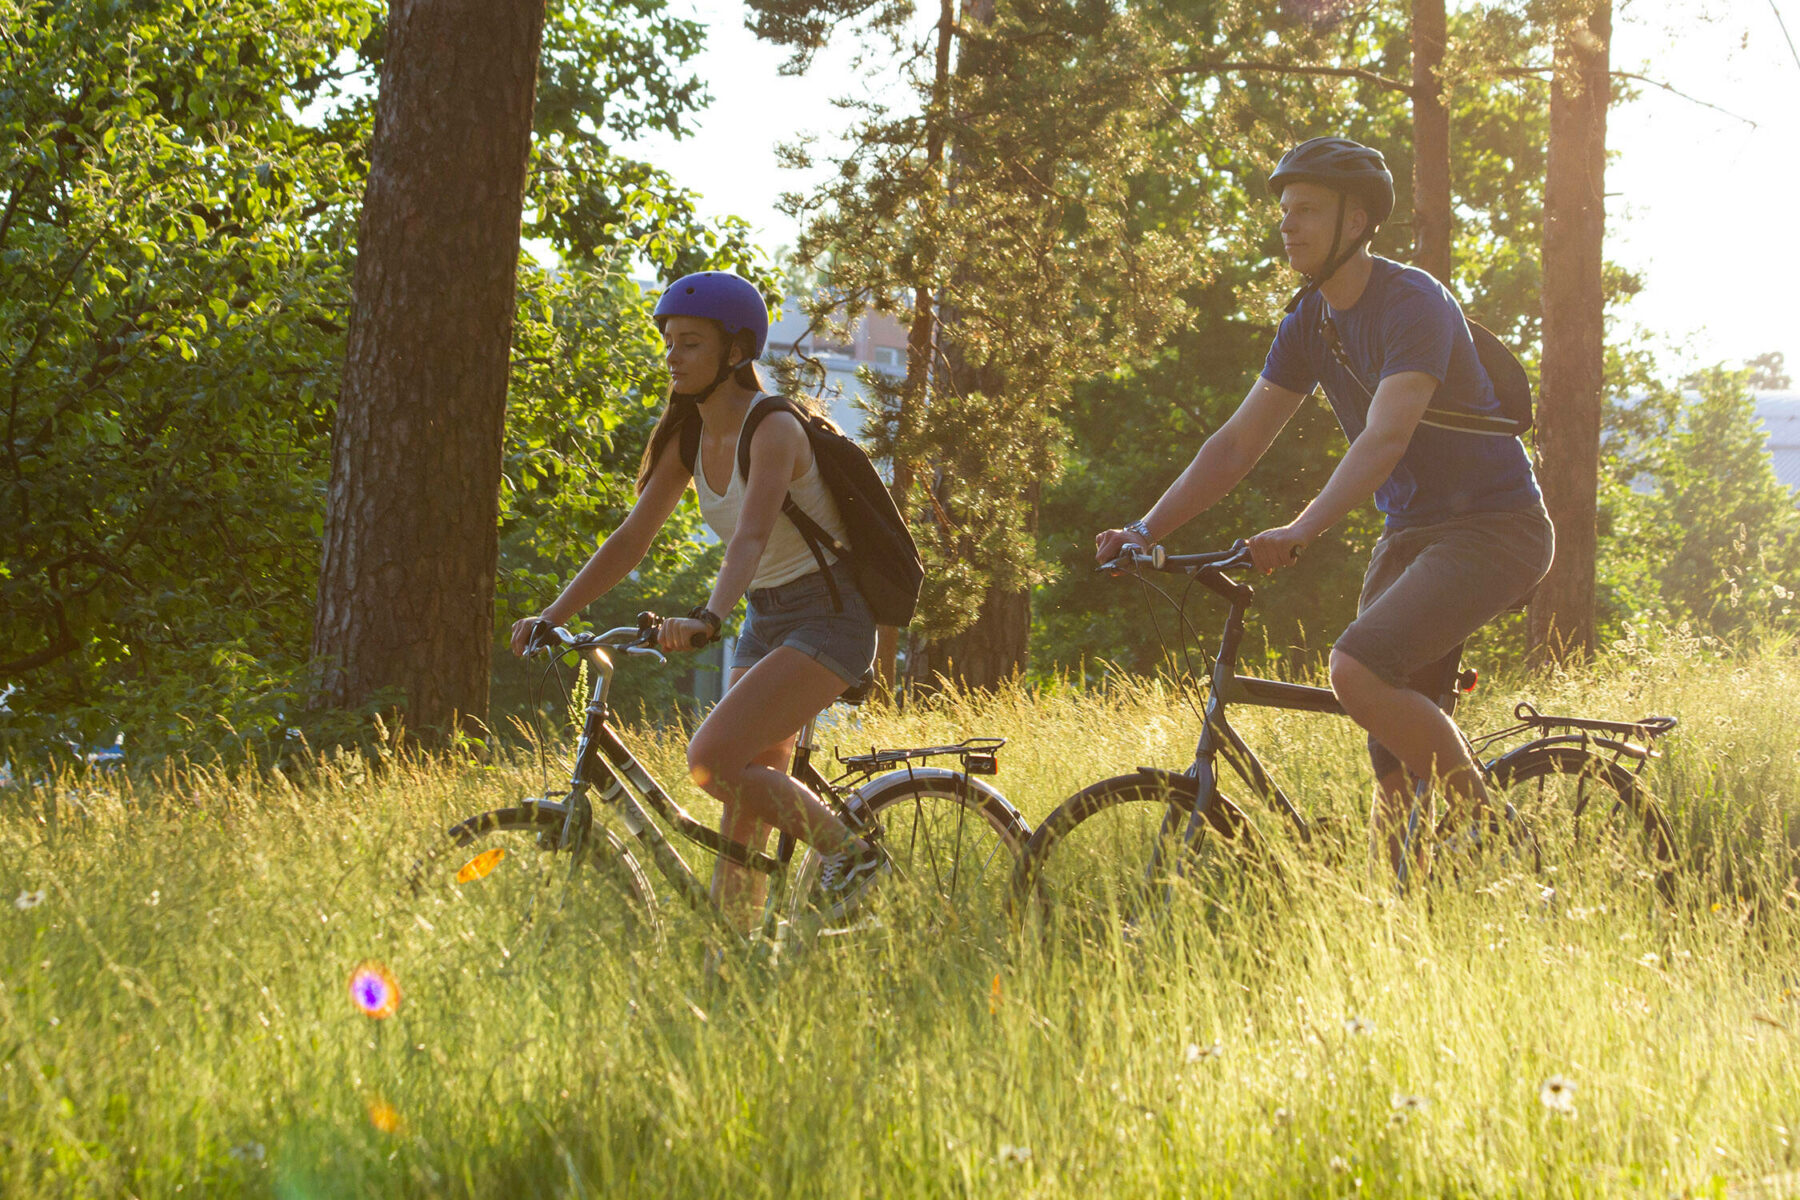 A woman and a man cycle through a park past trees and meadows on a sunny day.